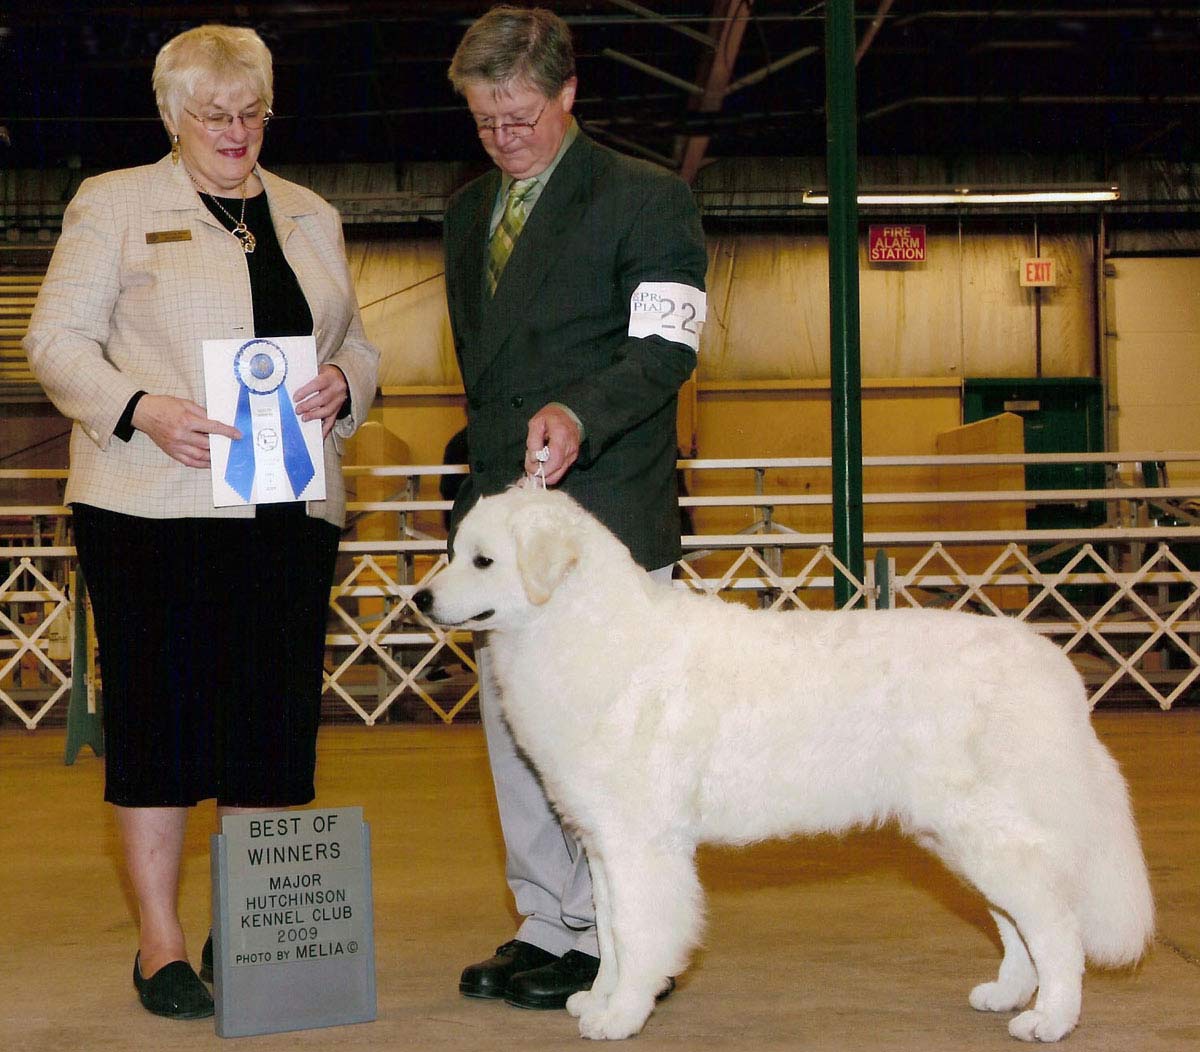 Best of Winners (Major) Hutchinson KC, 2009. Handled above by owner Chuck Ringering.